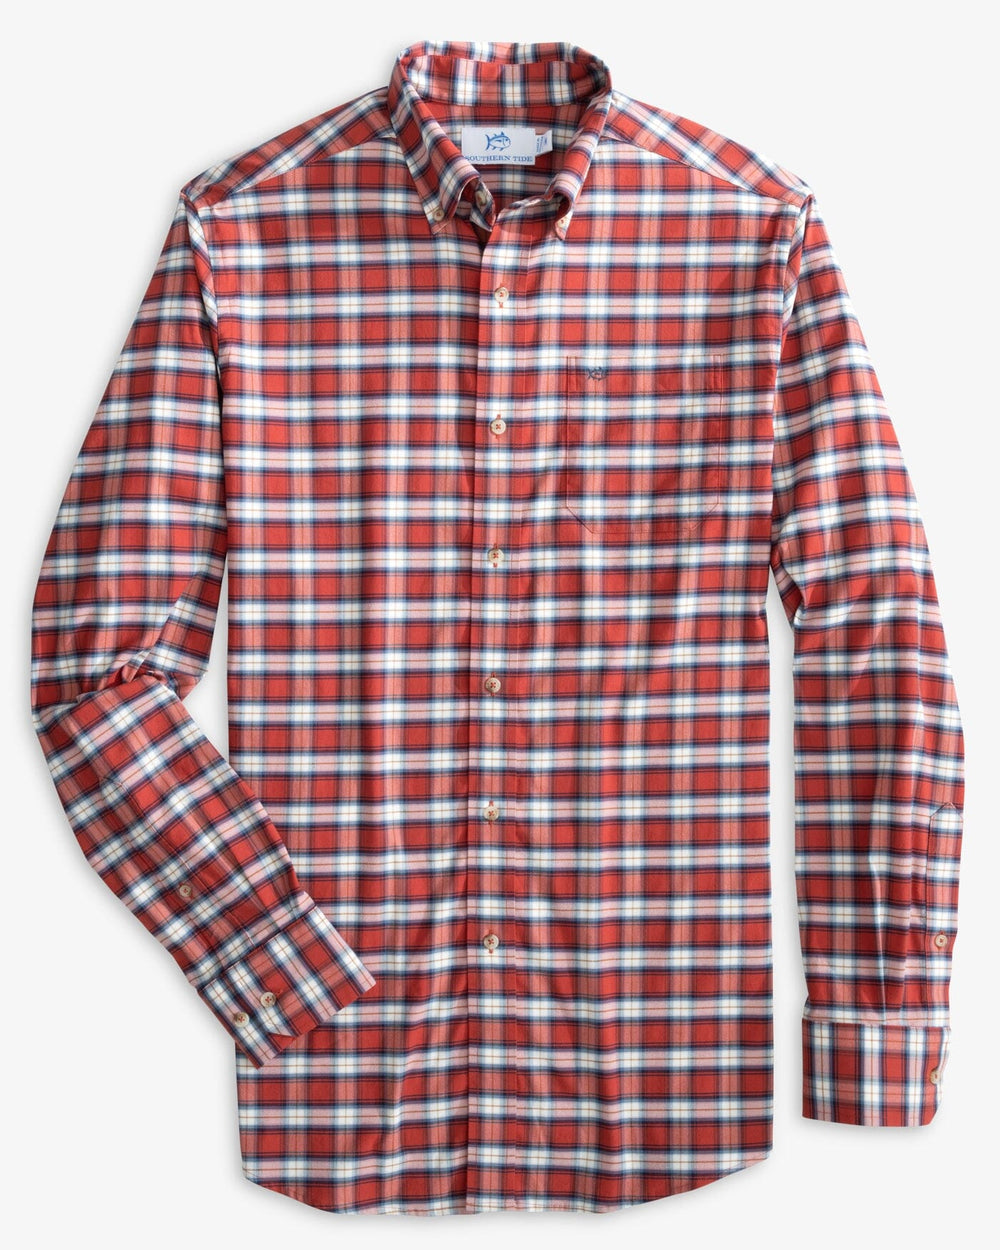 The front view of the Southern Tide Coastal Passage Rockledge Plaid Long Sleeve Sportshirt by Southern Tide - Fire Place Red